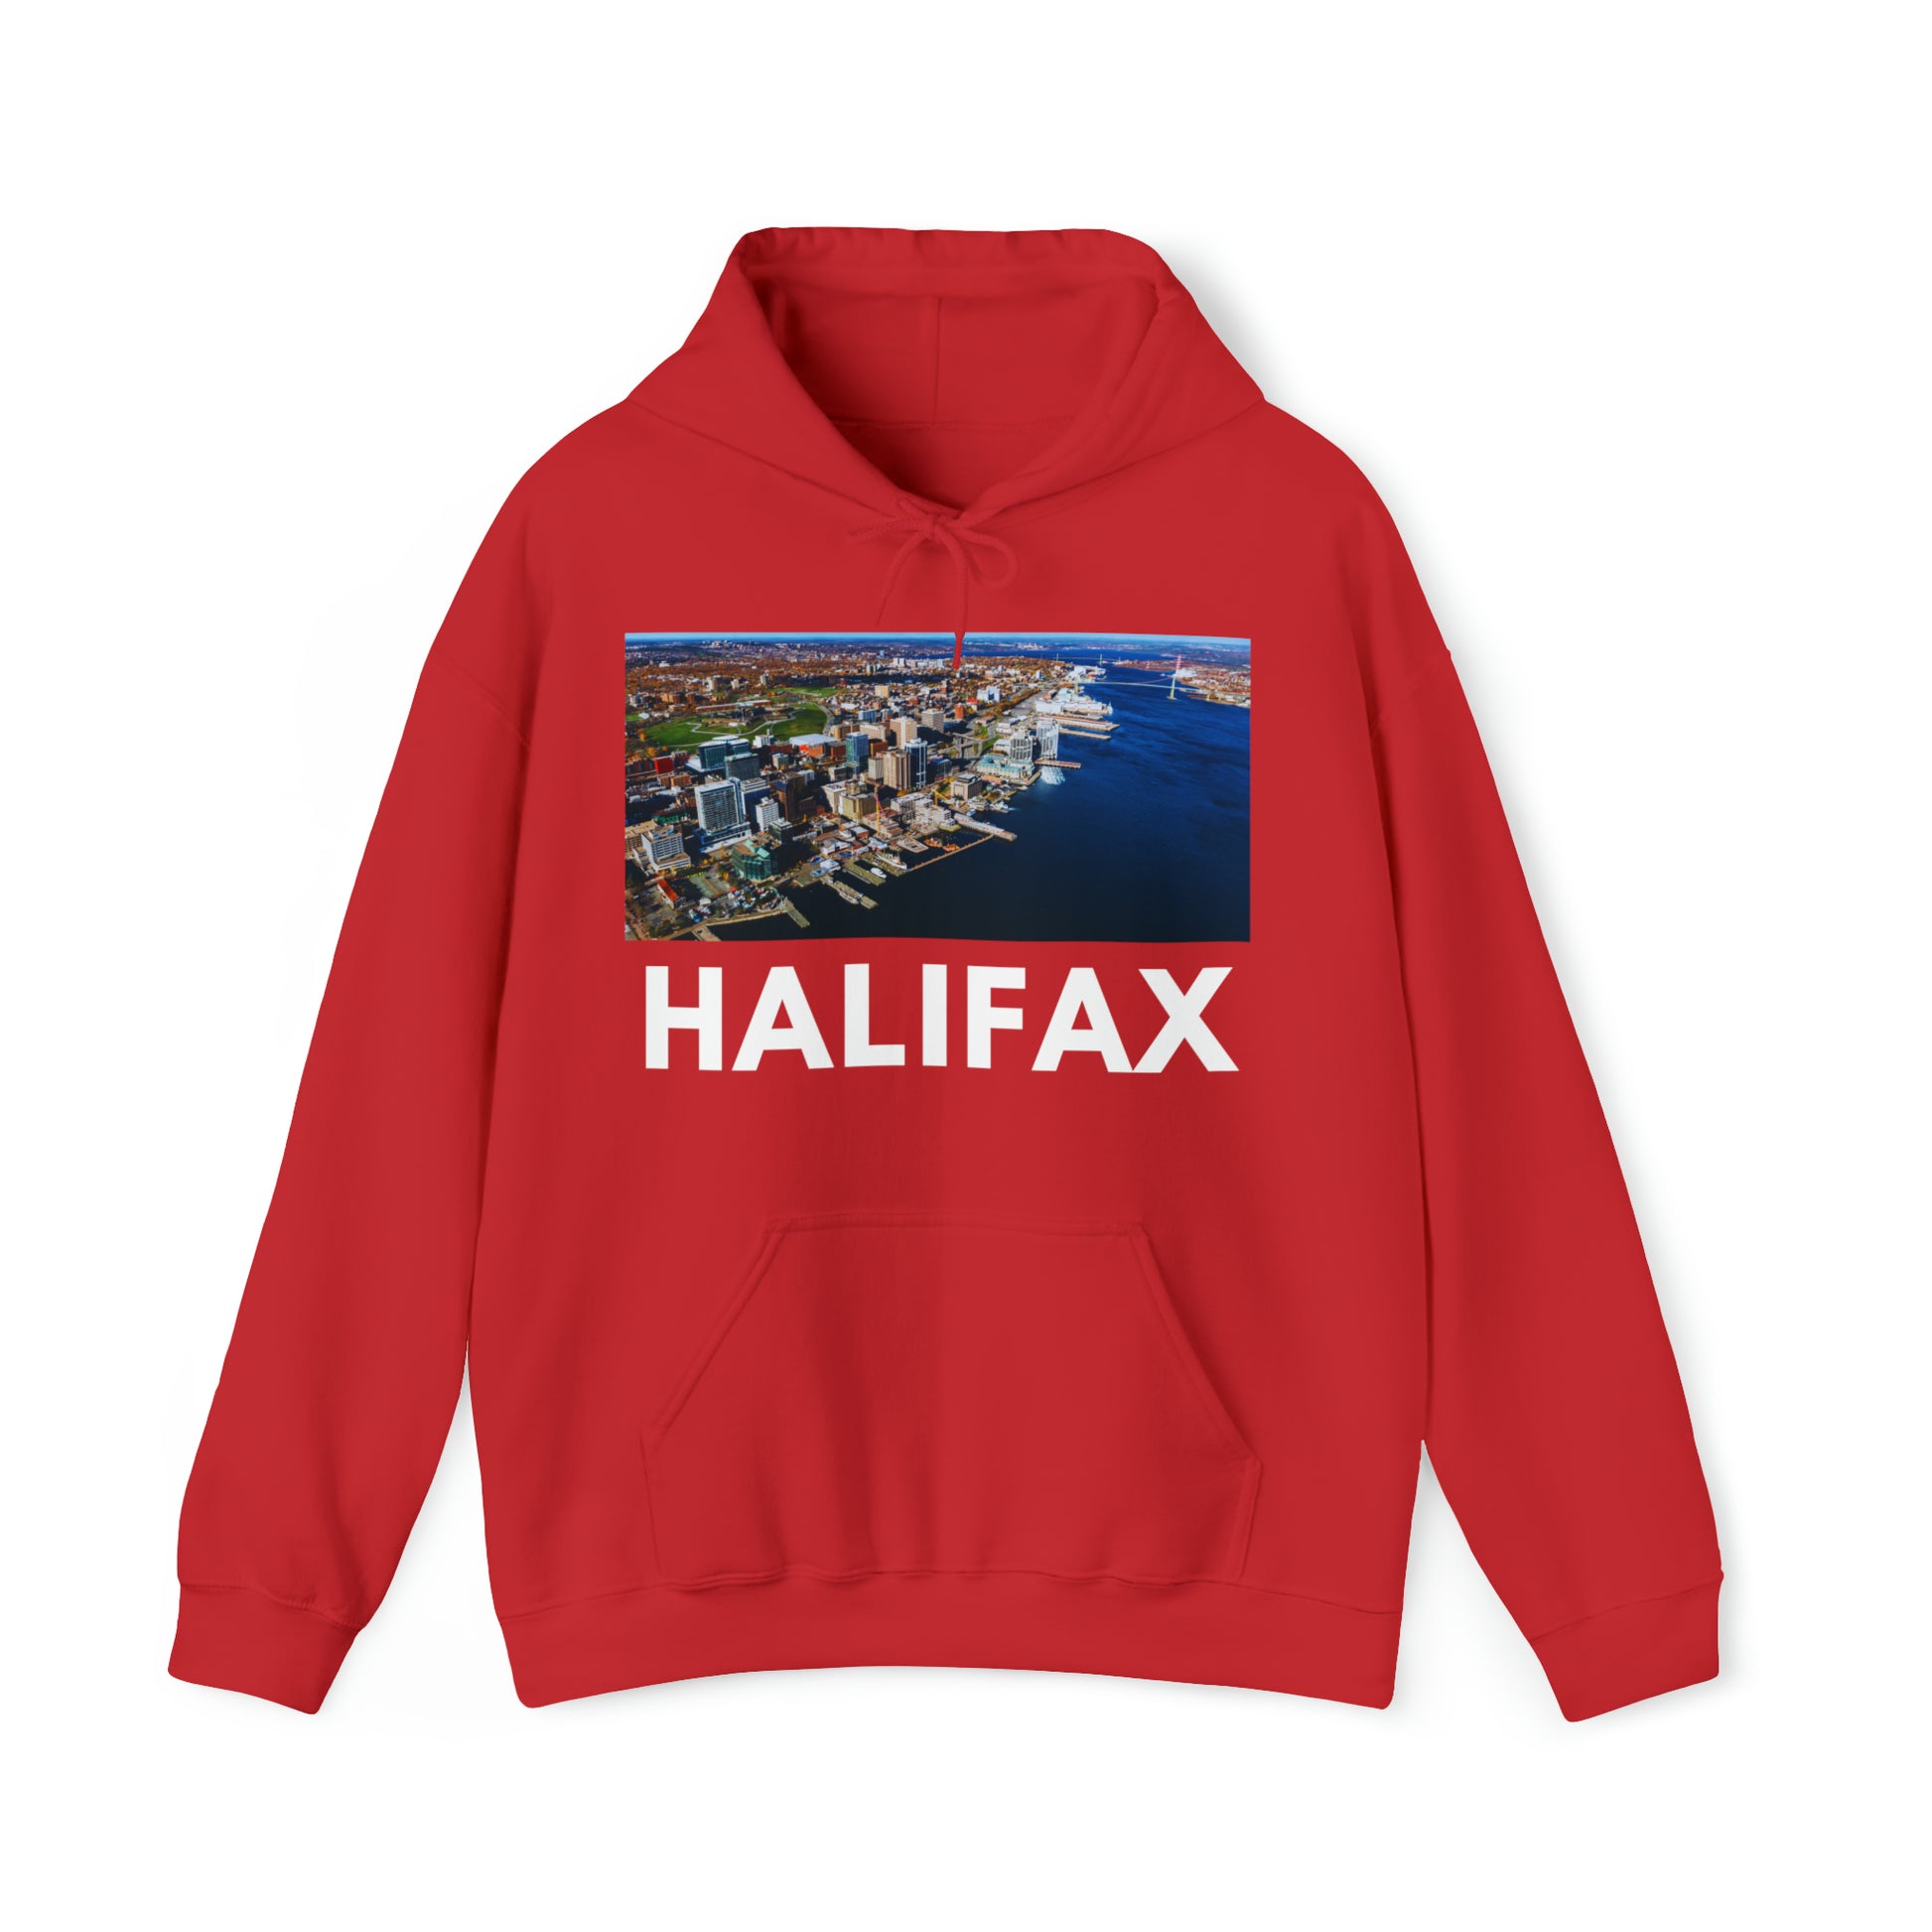 XL Red Halifax Hoodie: The Waterfront from HoodySZN.com